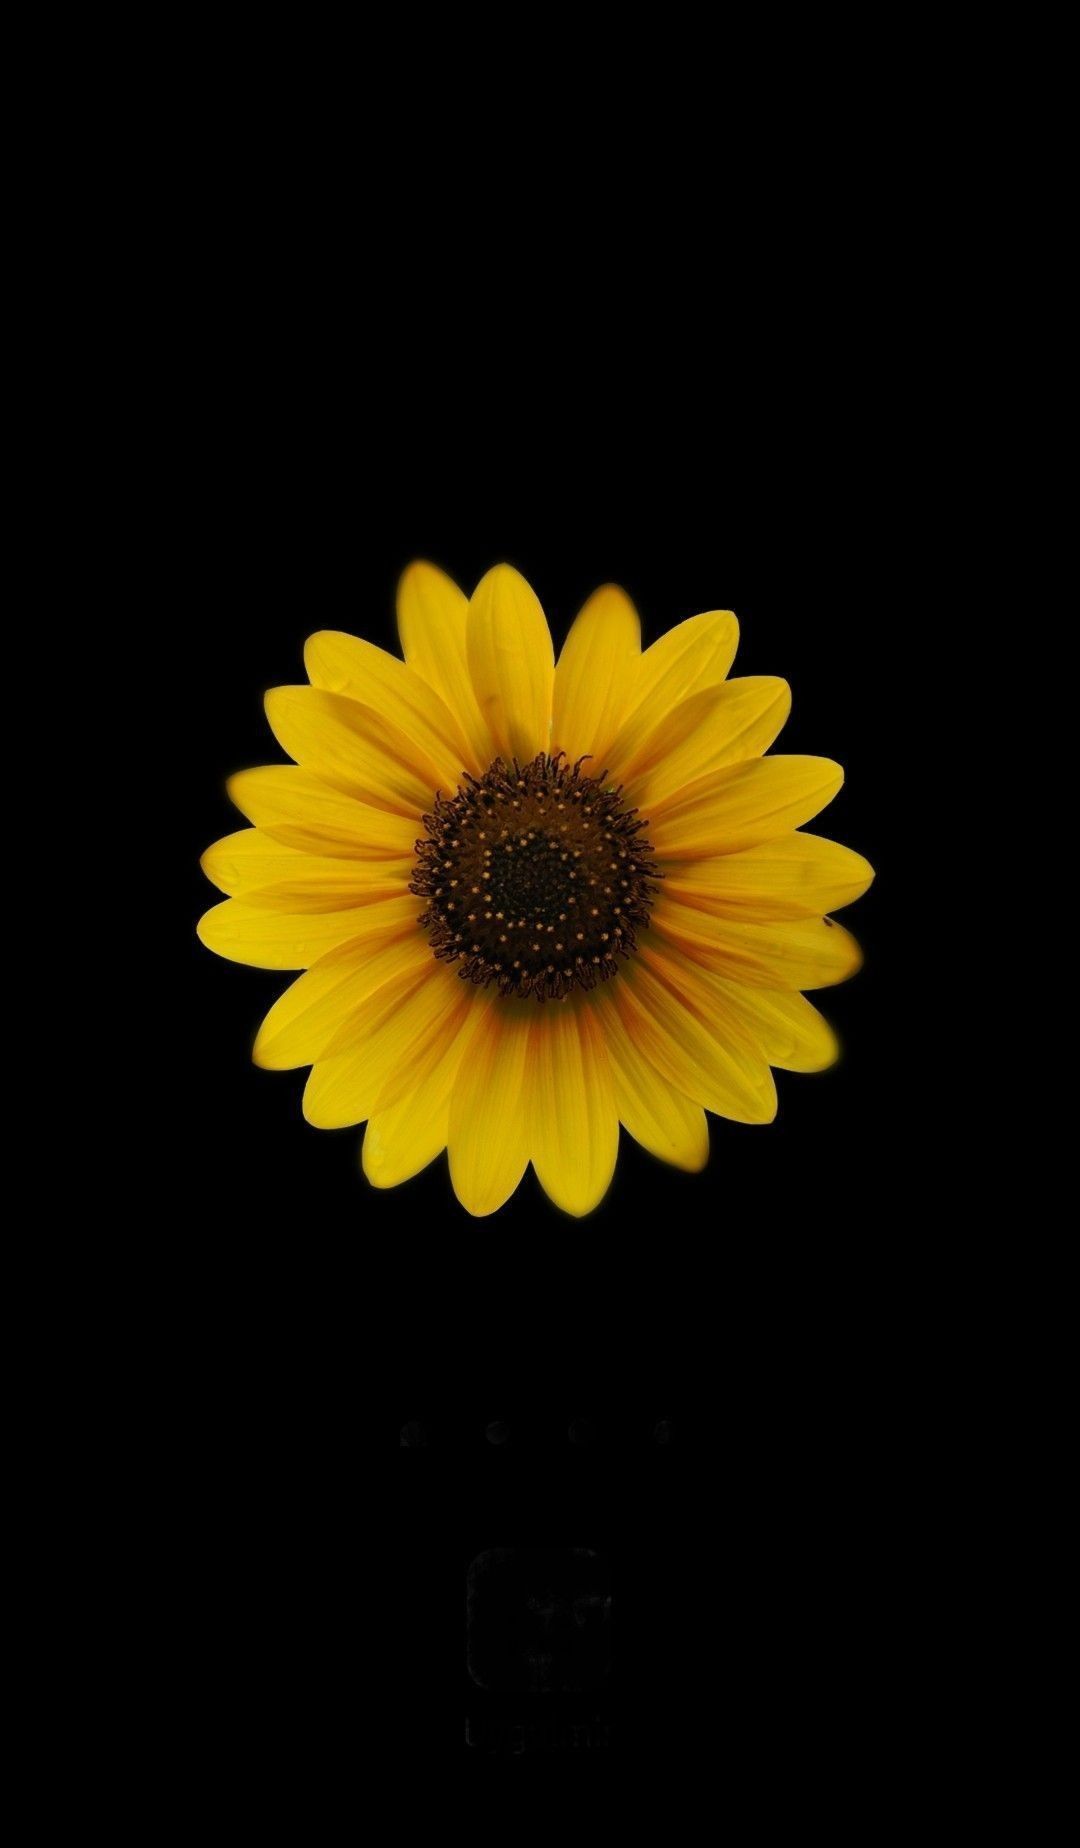 Autumn by KmyGraphic. Nature iphone wallpaper, Sunflower wallpaper, Sunflower iphone wallpaper